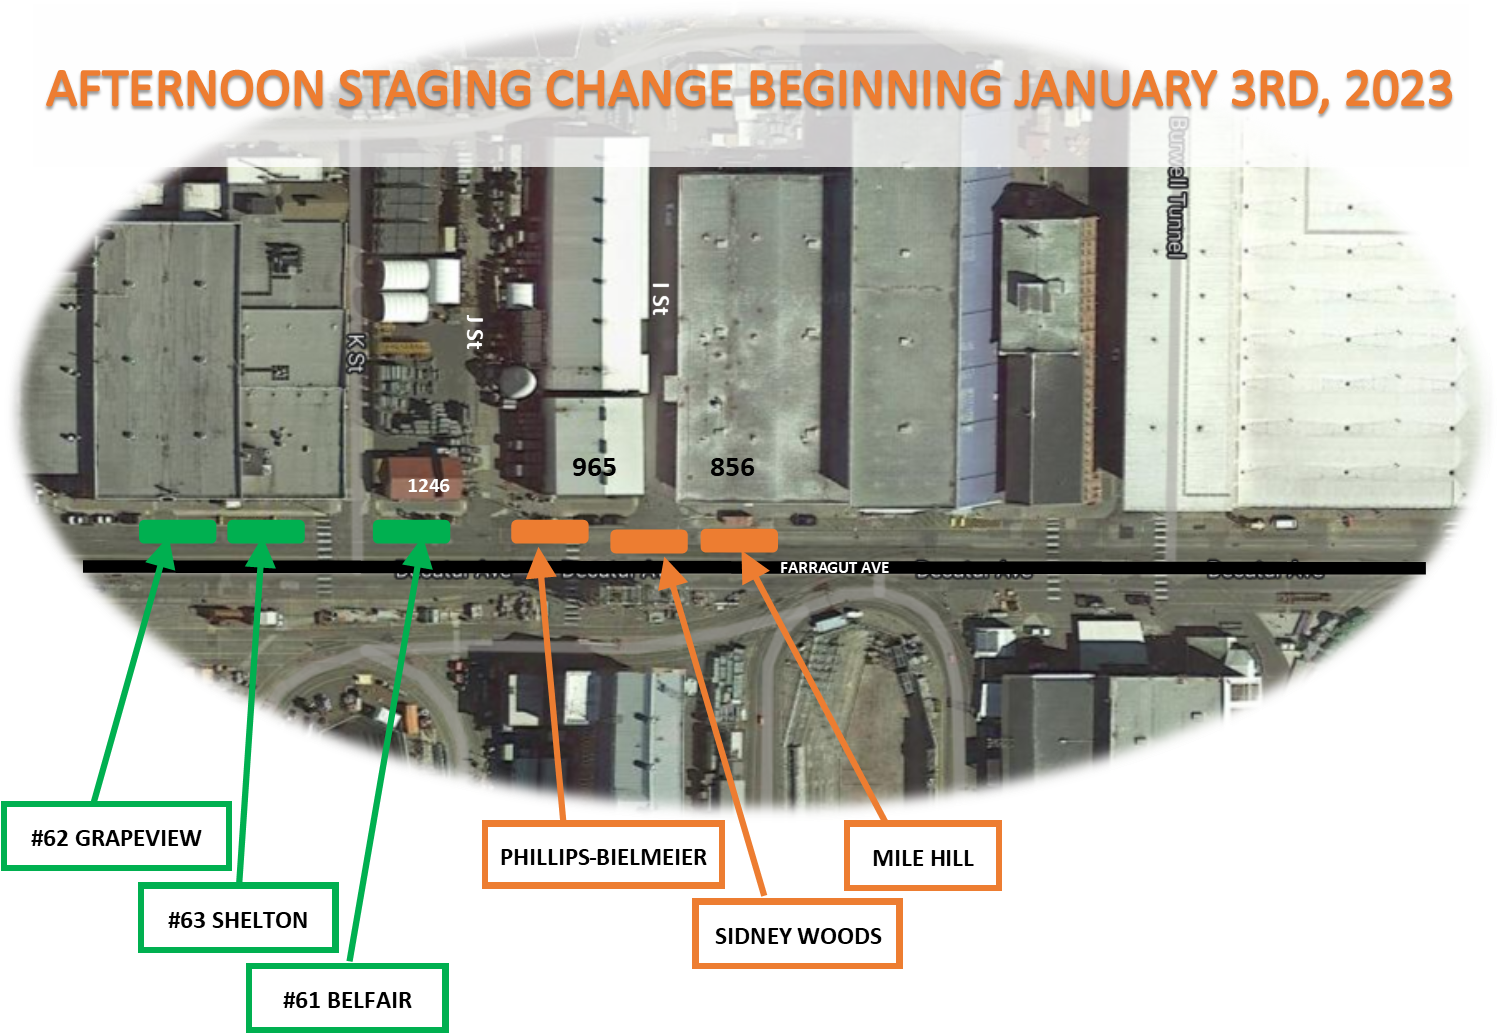 Staging change January 3, 2023